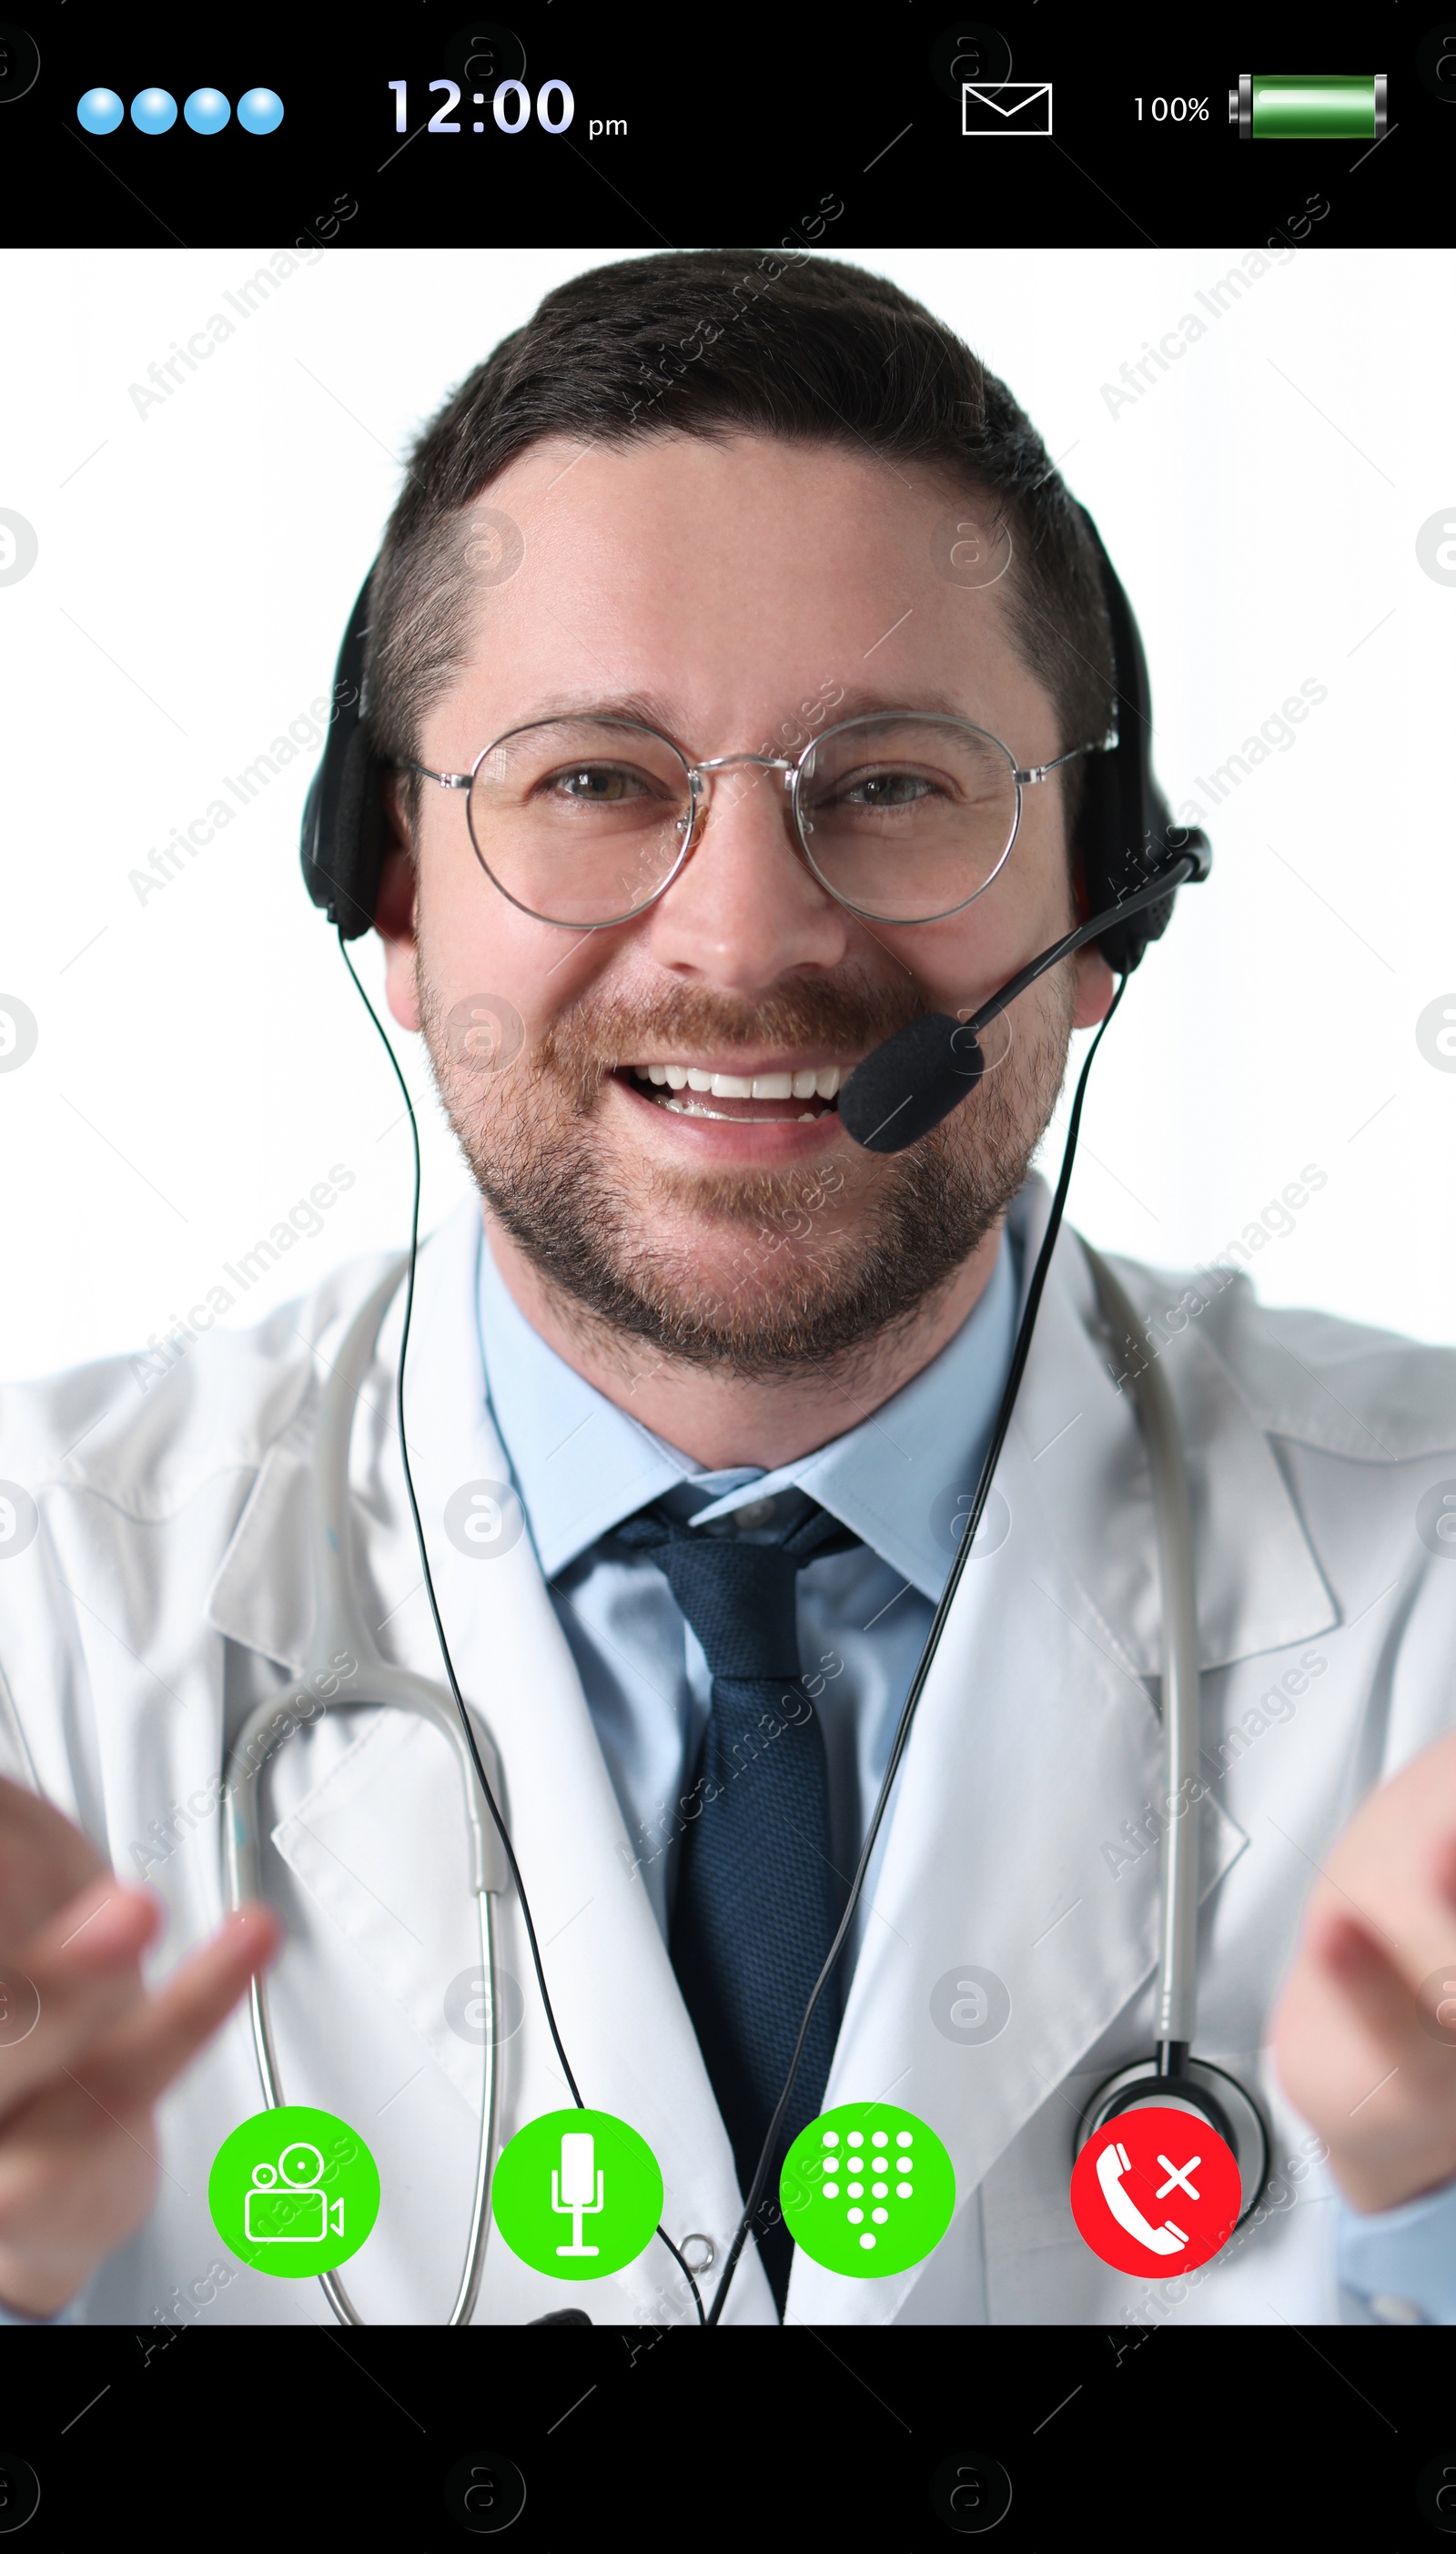 Image of Online medical consultation. Doctor with headset working via video chat application